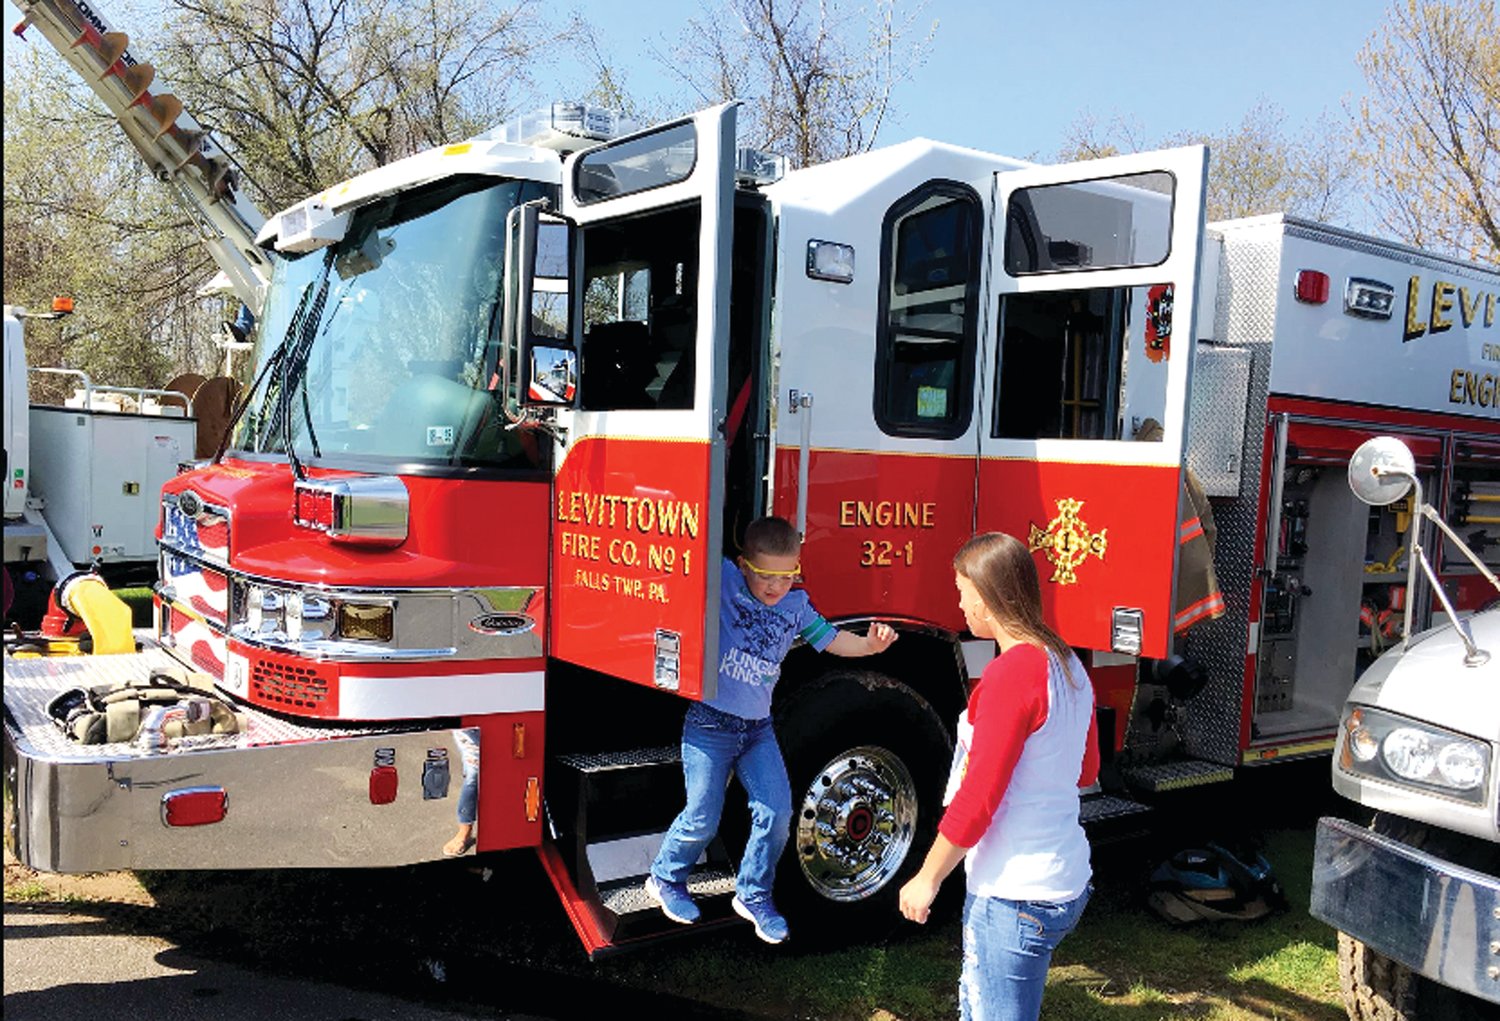 A youngster gets out of a Levittown Fire Co. truck at a prior Touch a Truck event in Falls township.